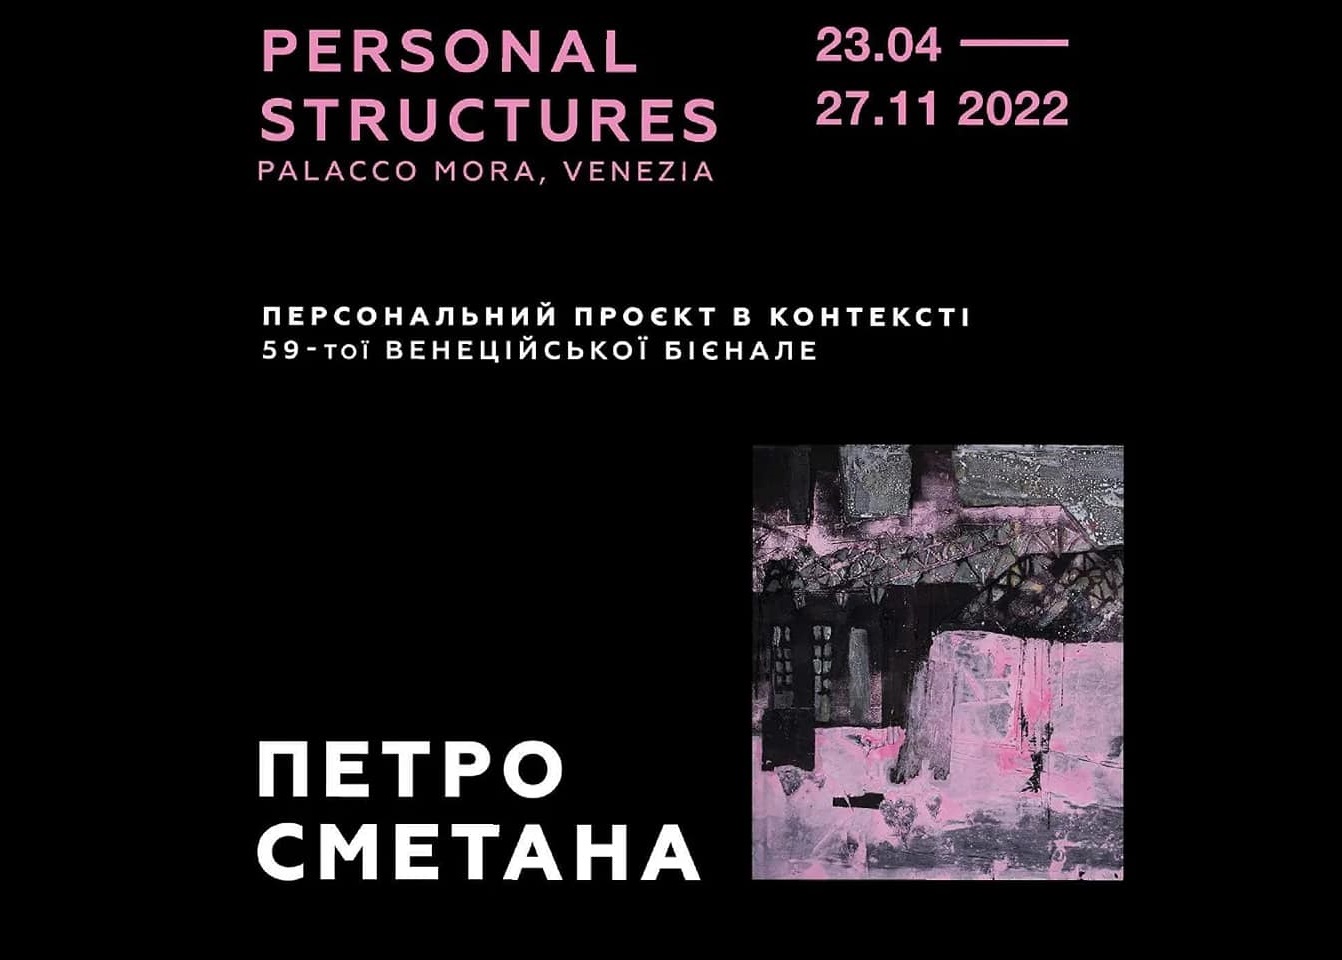 Personal project “Personal Structures” on 59th Art Biennale